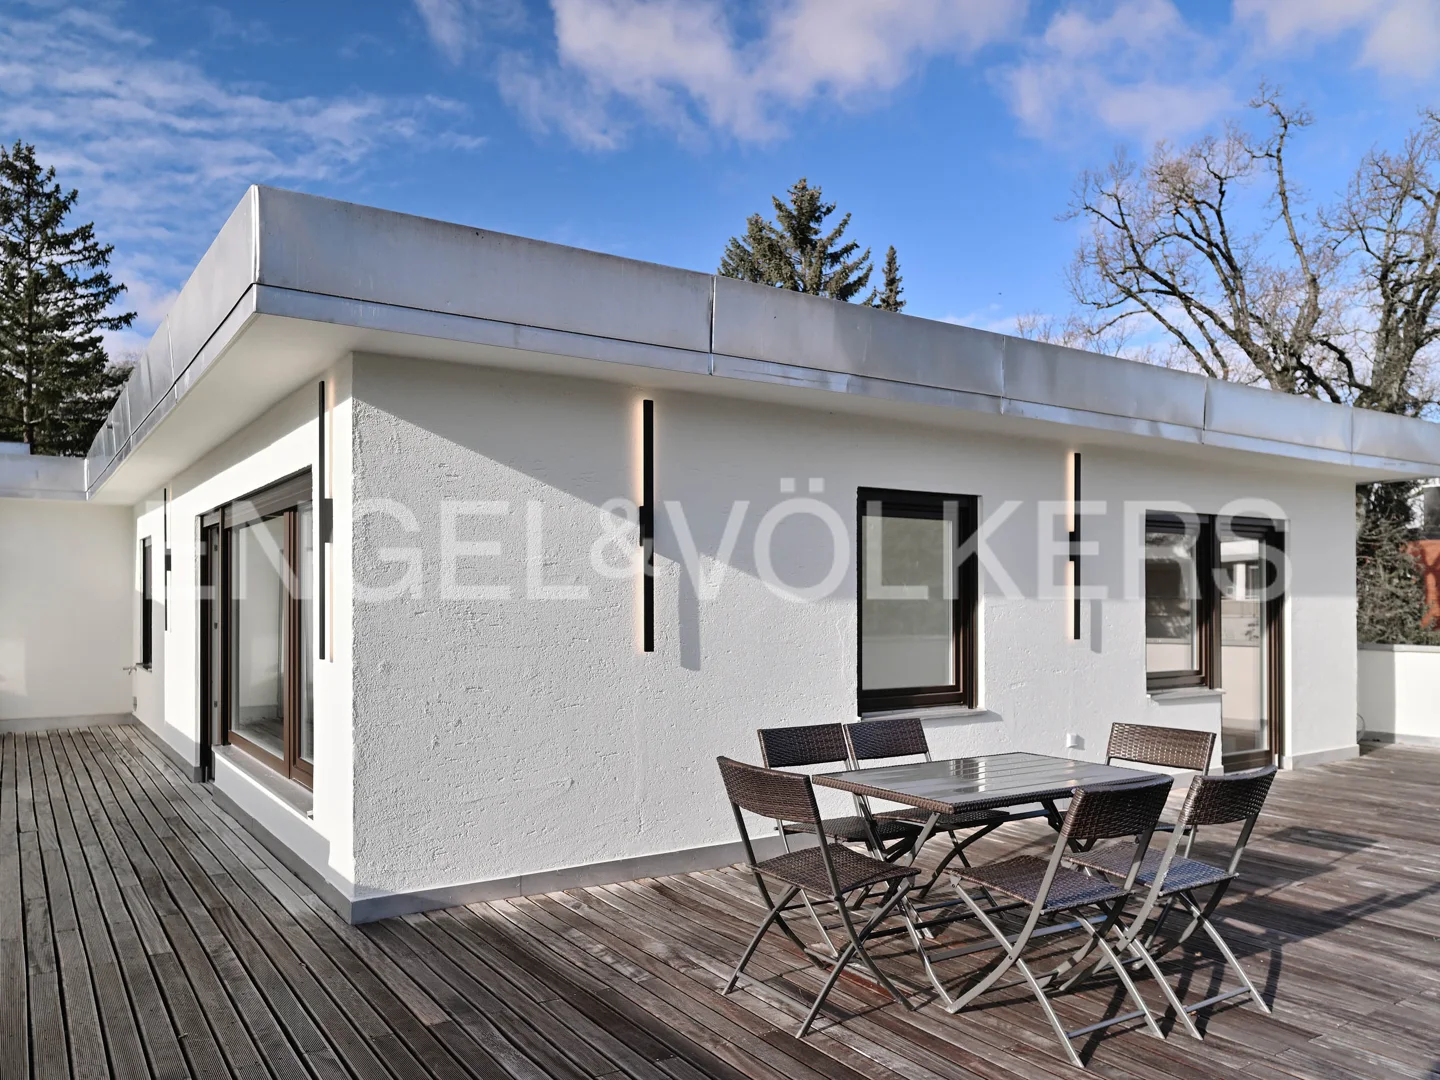 Exclusive, renovated roof terrace apartment in prime Solln location